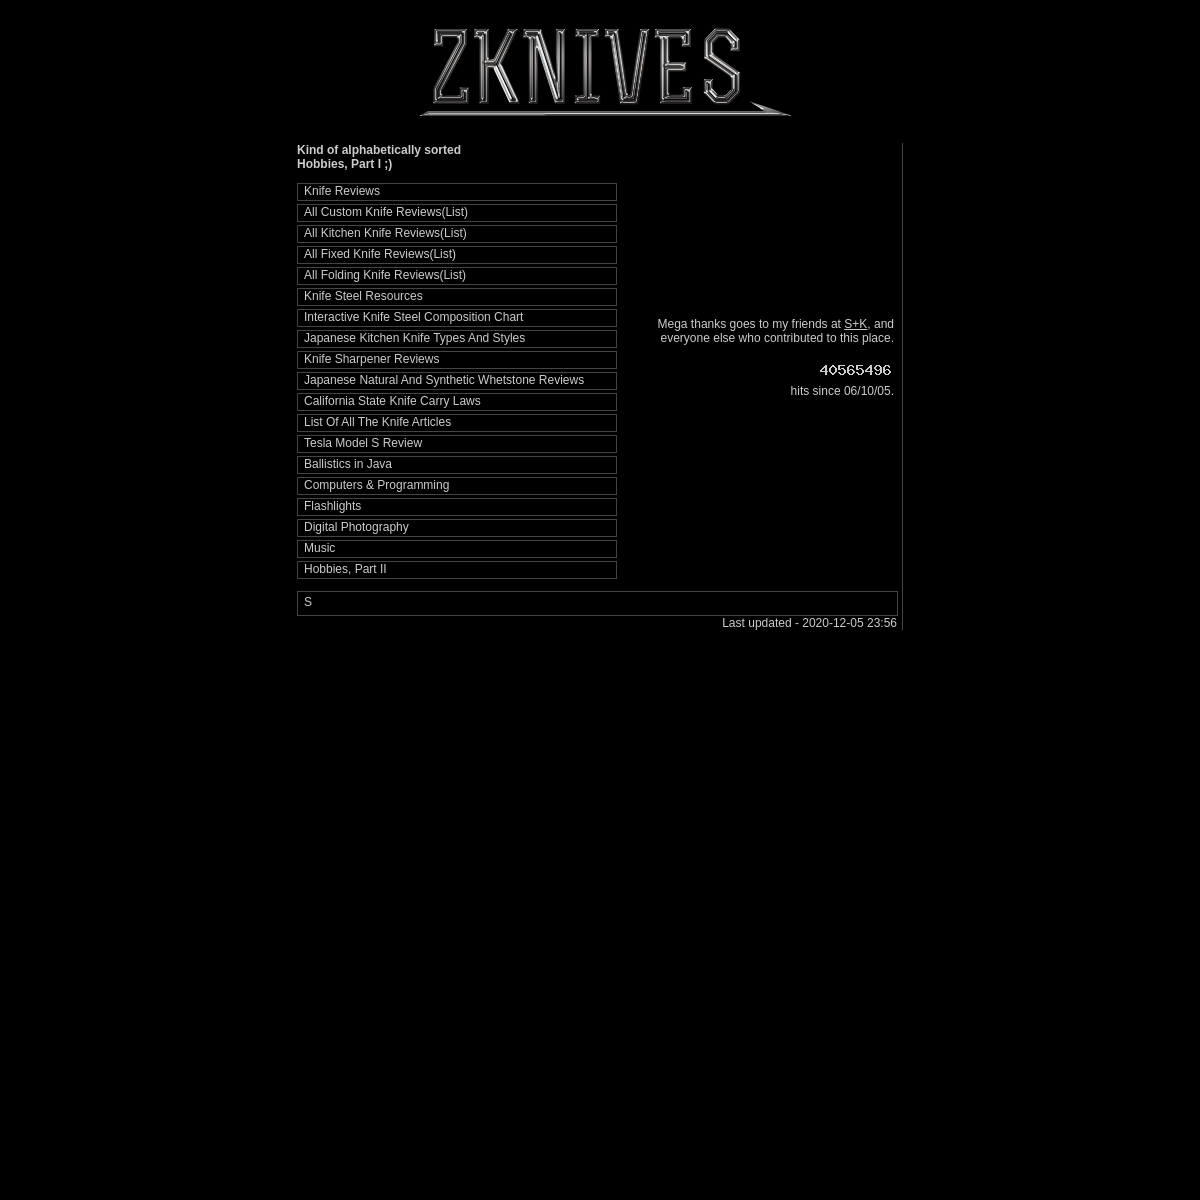 A complete backup of zknives.com